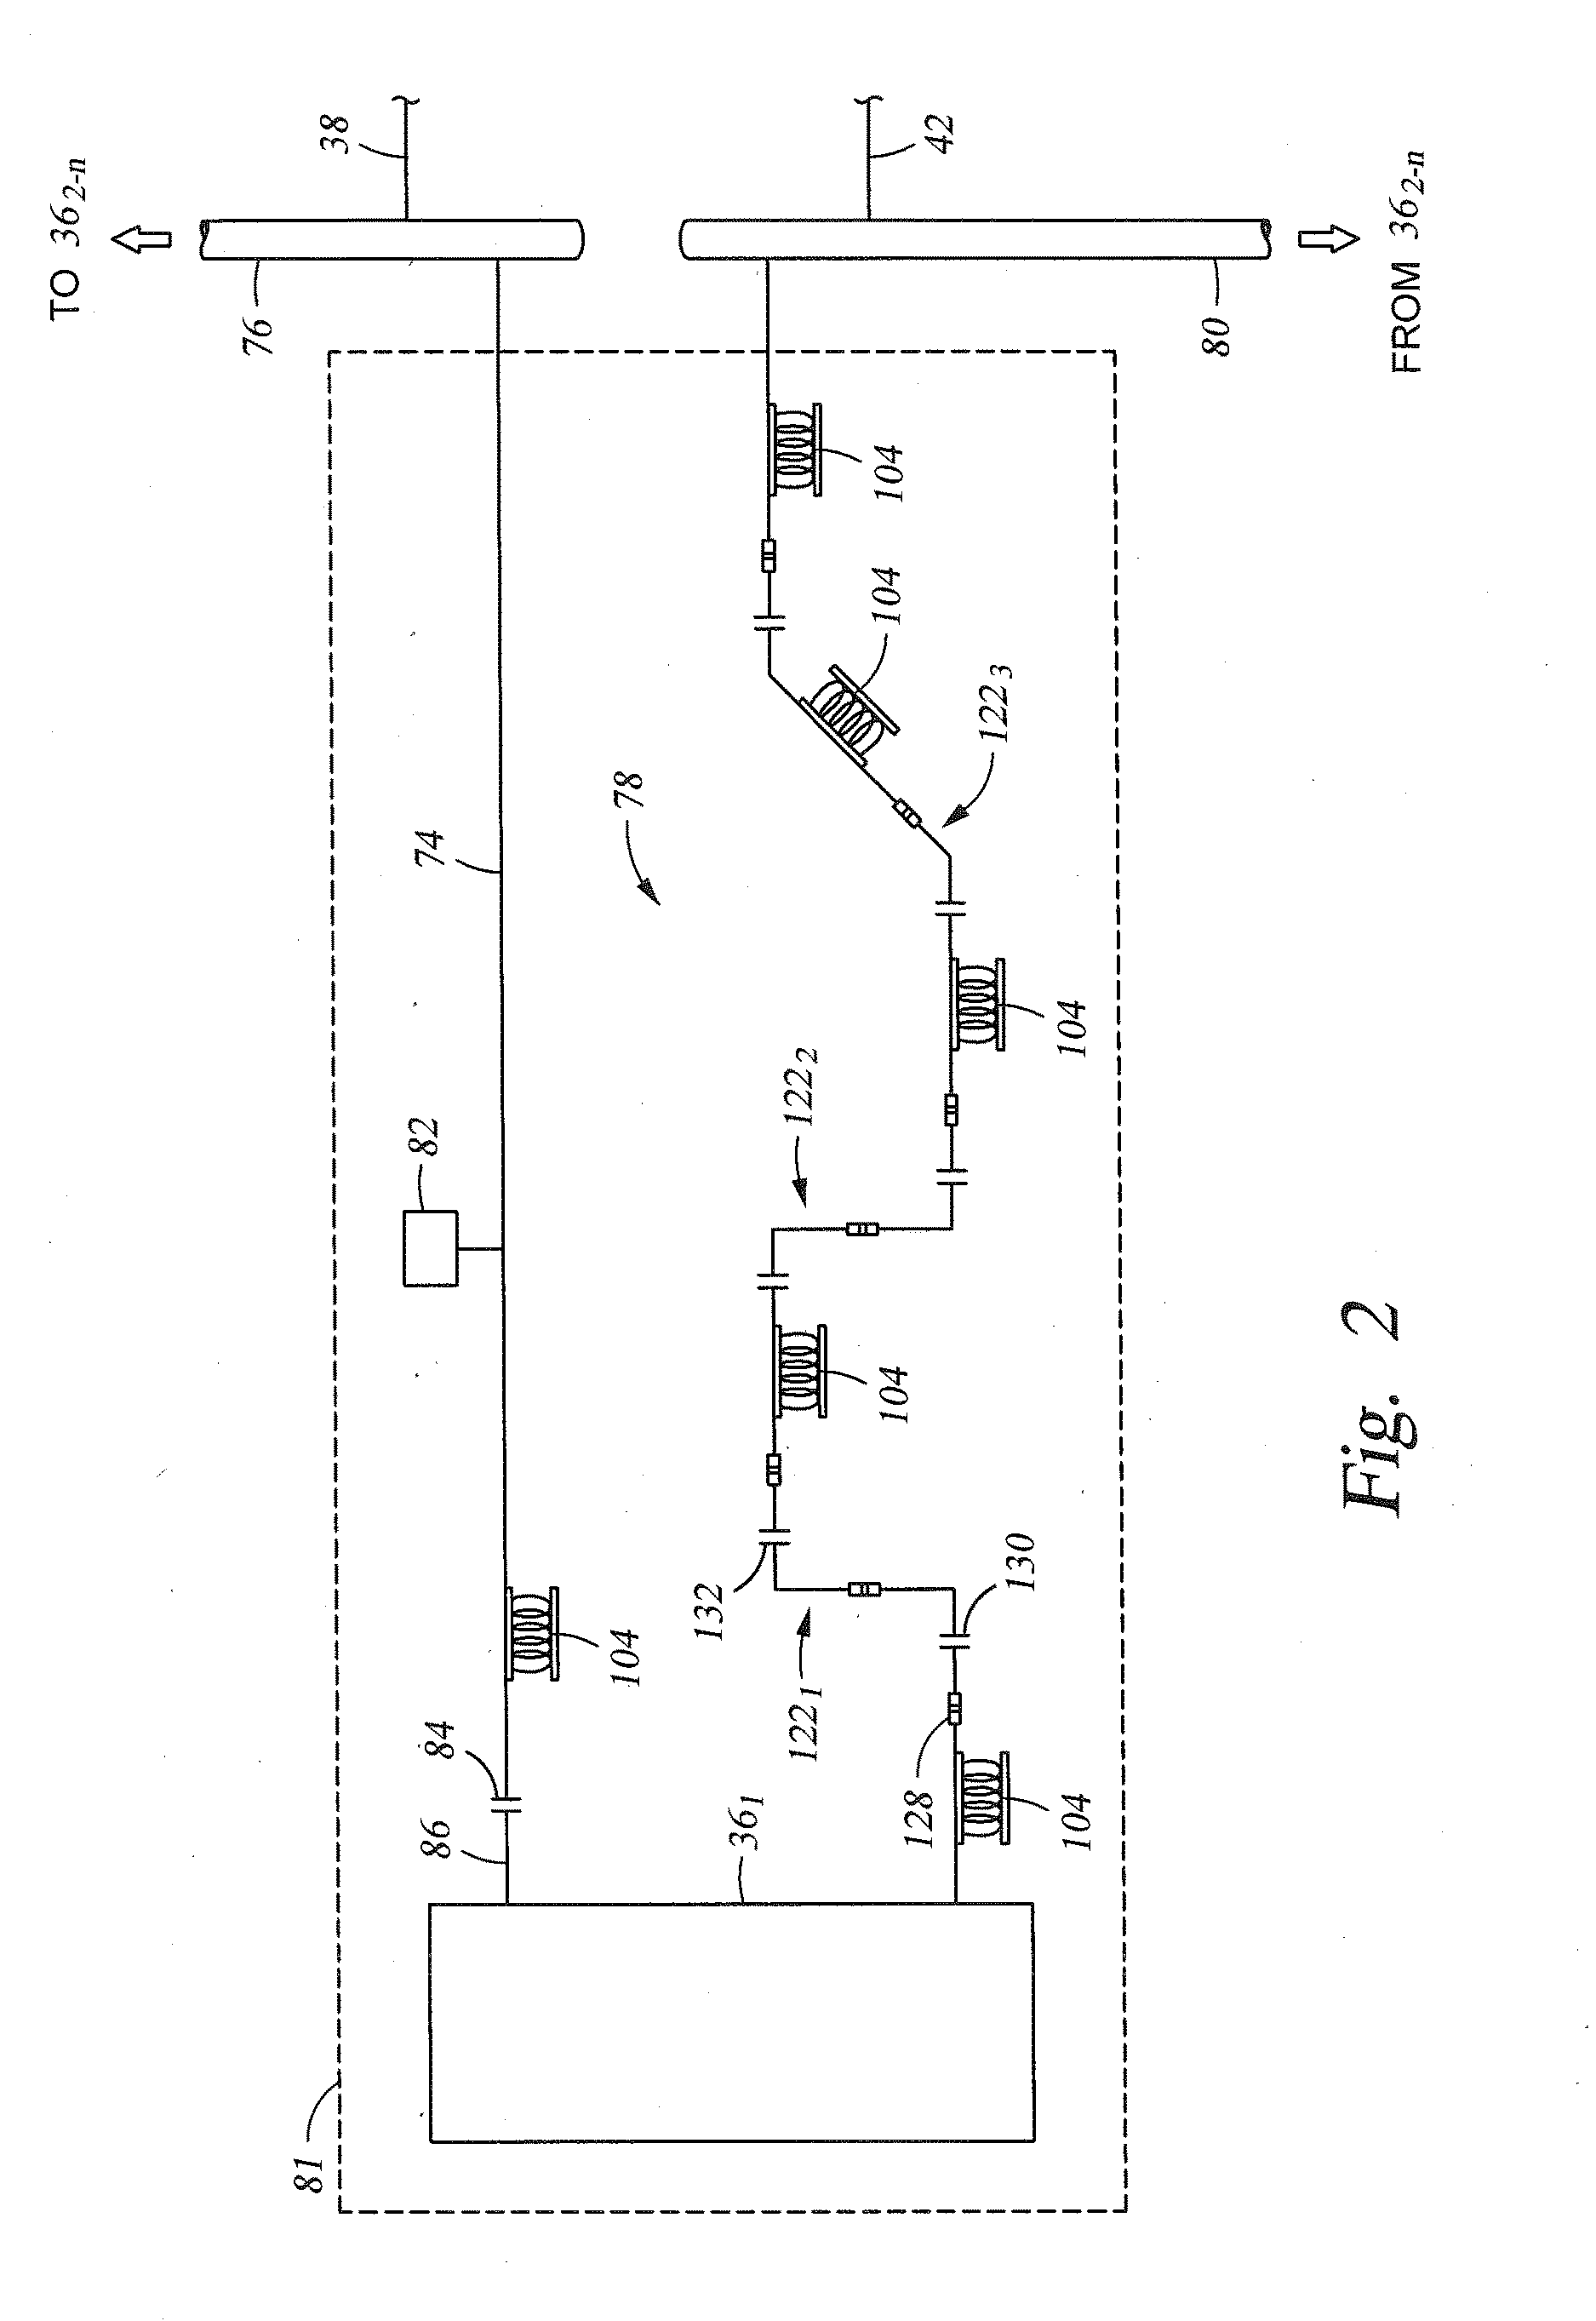 System for Reducing Vibrations in a Pressure Pumping Fleet